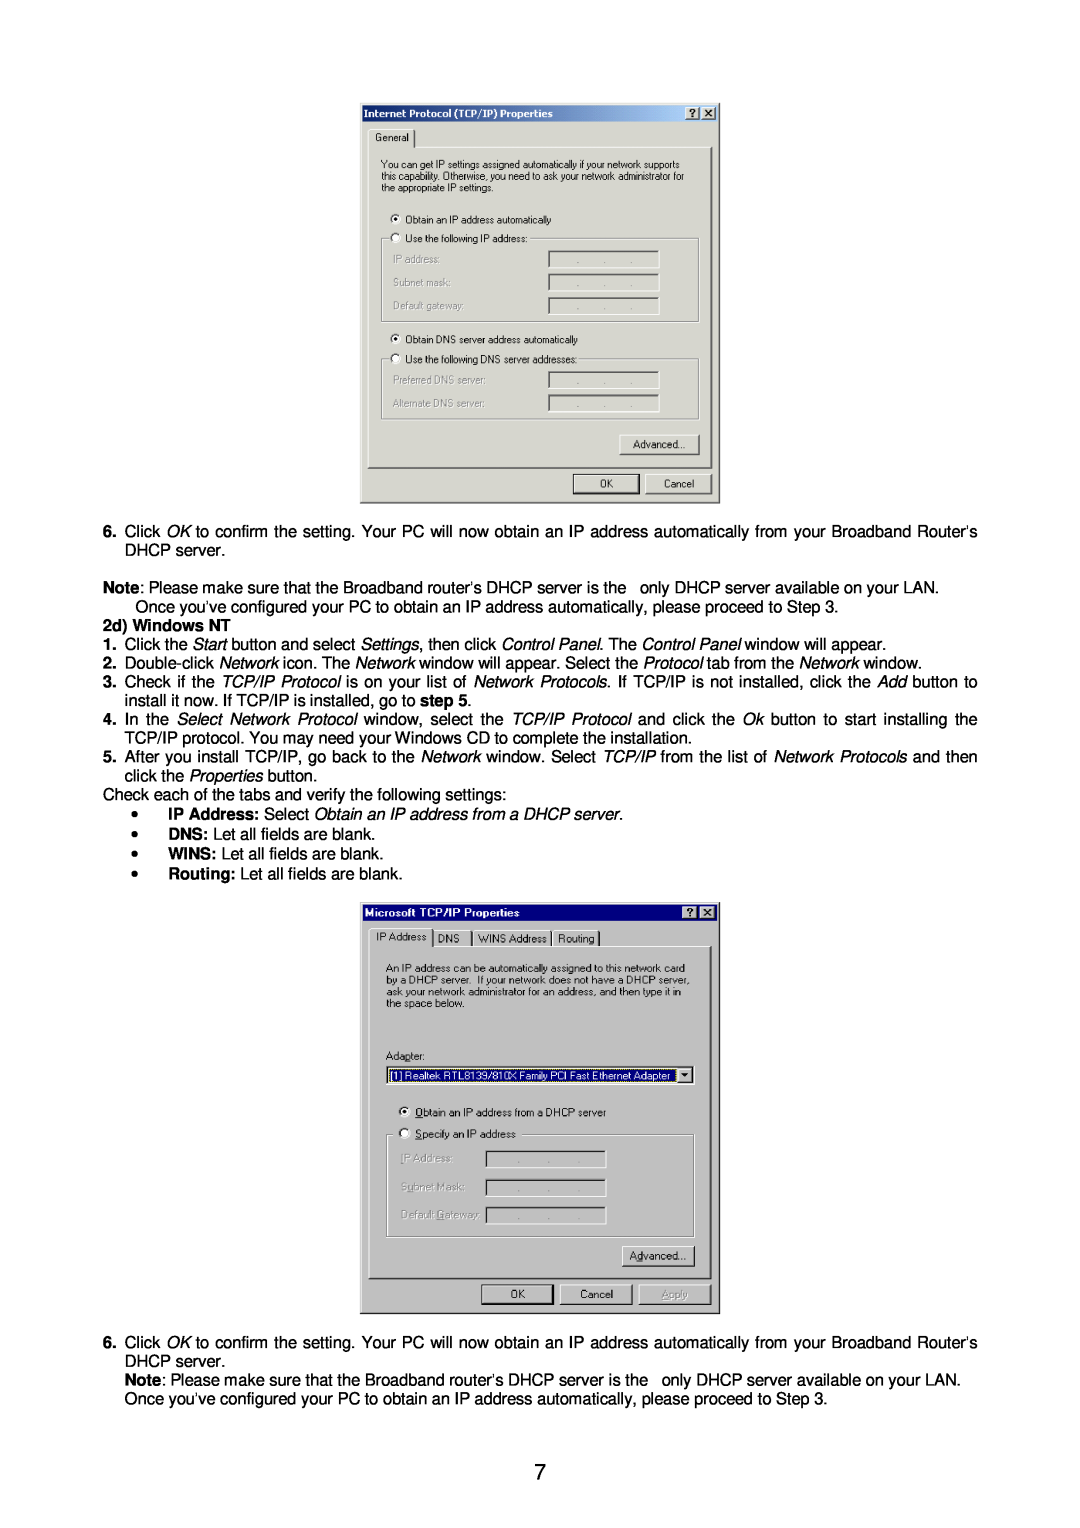 Edimax Technology Broadband Router manual 2d Windows NT, ∙ IP Address Select Obtain an IP address from a DHCP server 